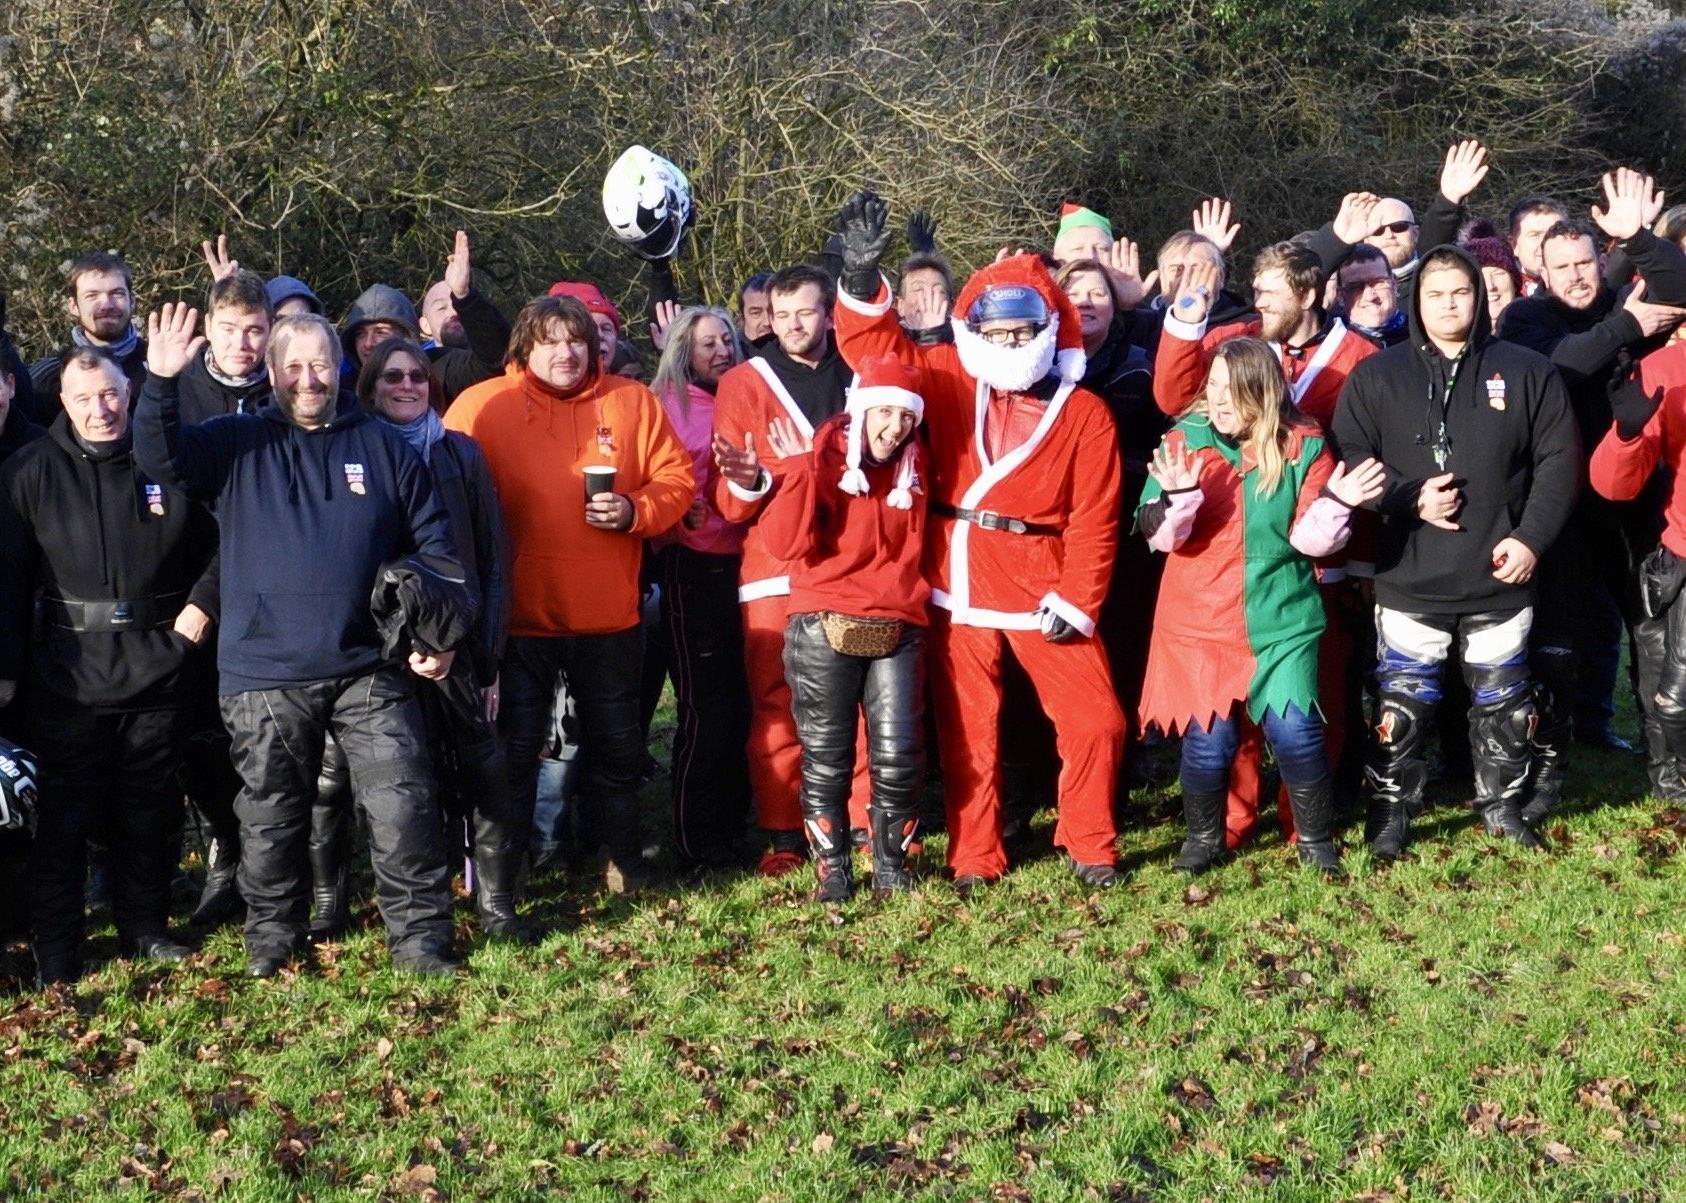 South Coast Bikers ride out to deliver presents to Chestnut Tree House children's hospice – SG141219